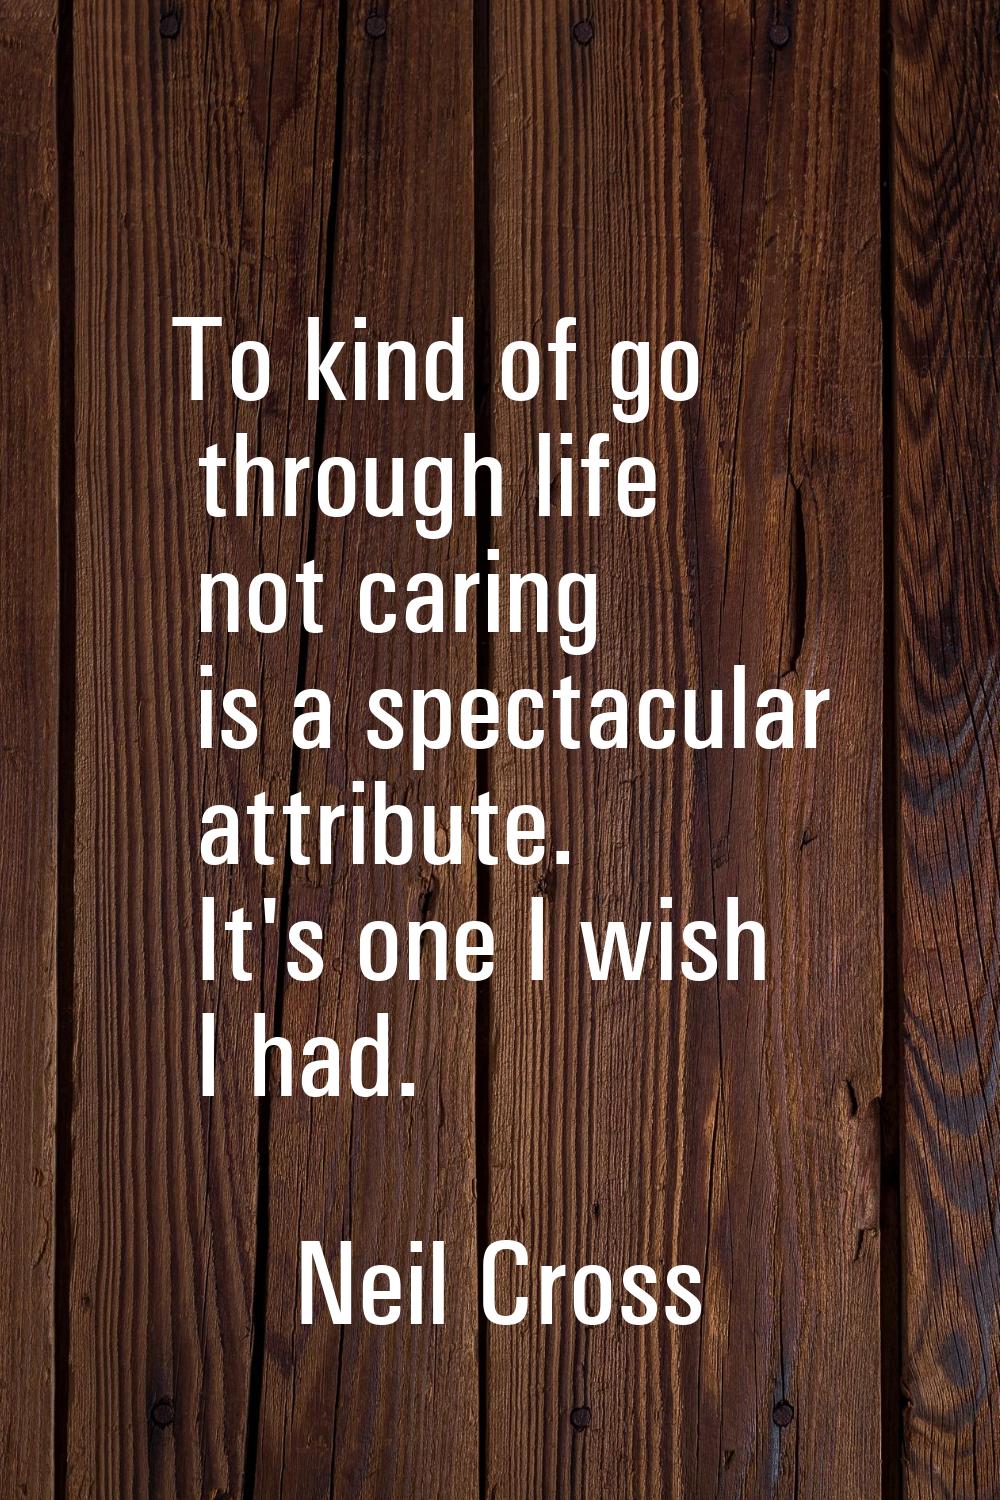 To kind of go through life not caring is a spectacular attribute. It's one I wish I had.